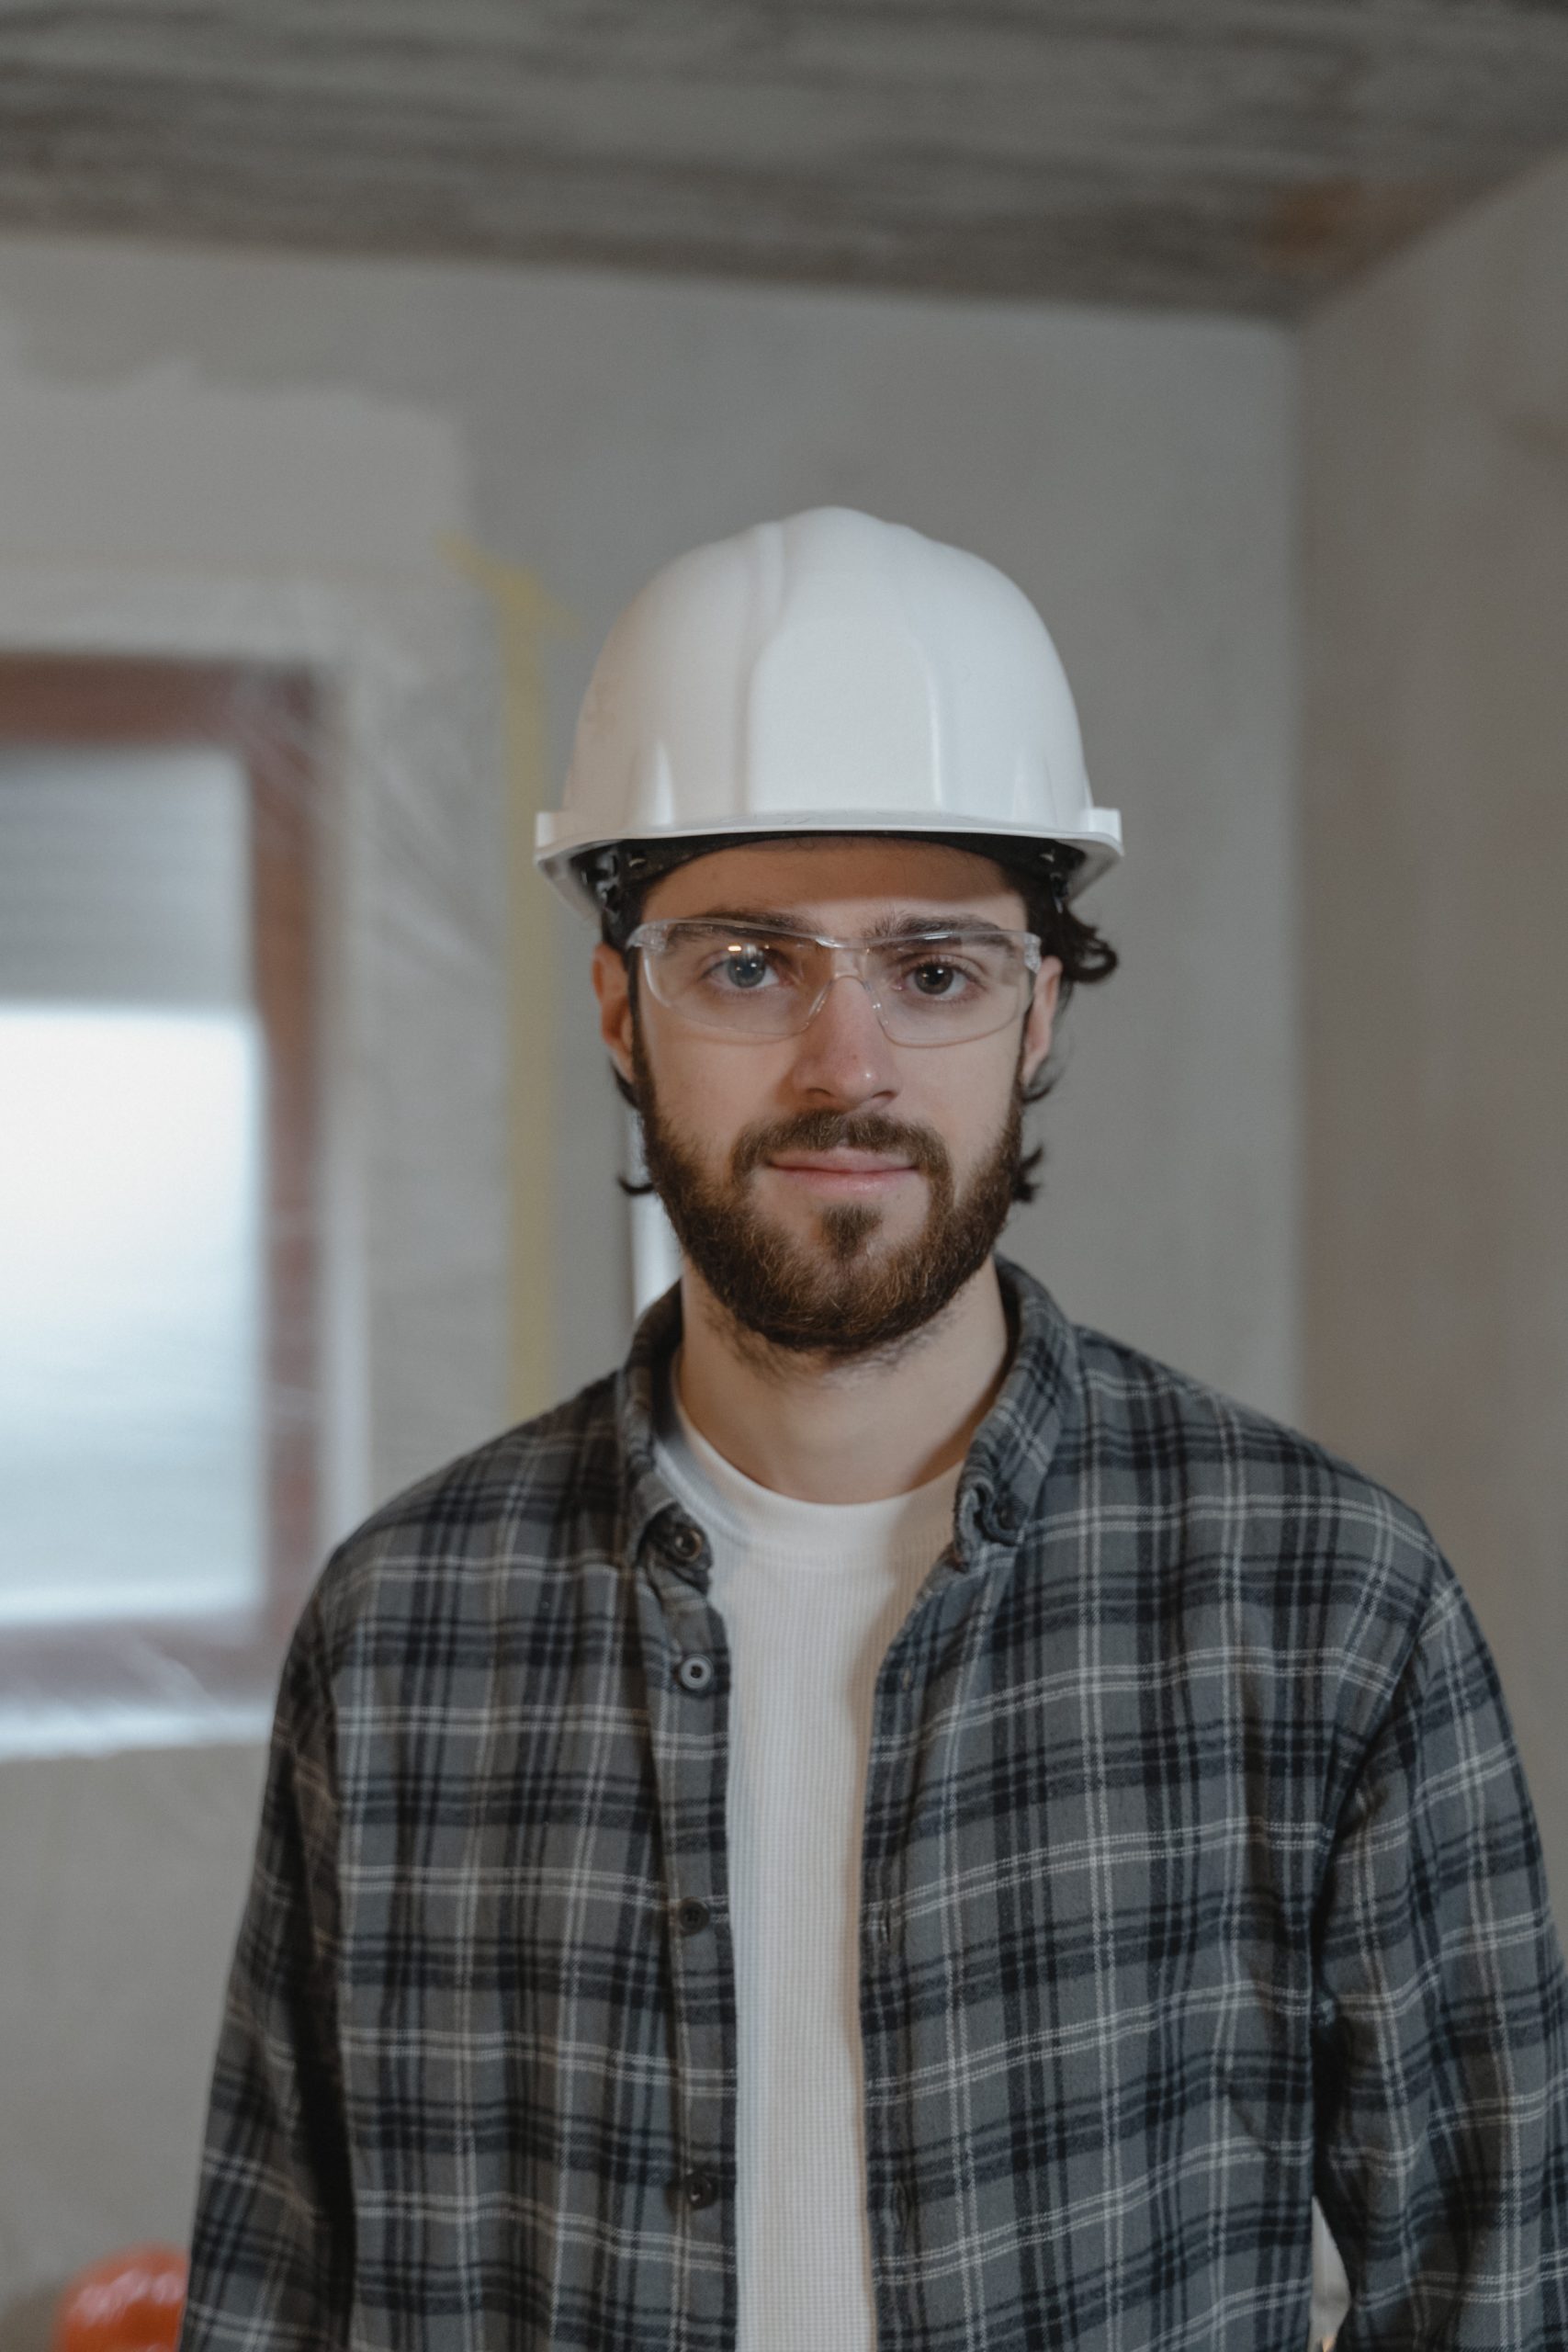 Tips For Hiring the Best Drywall Contractor in Miami